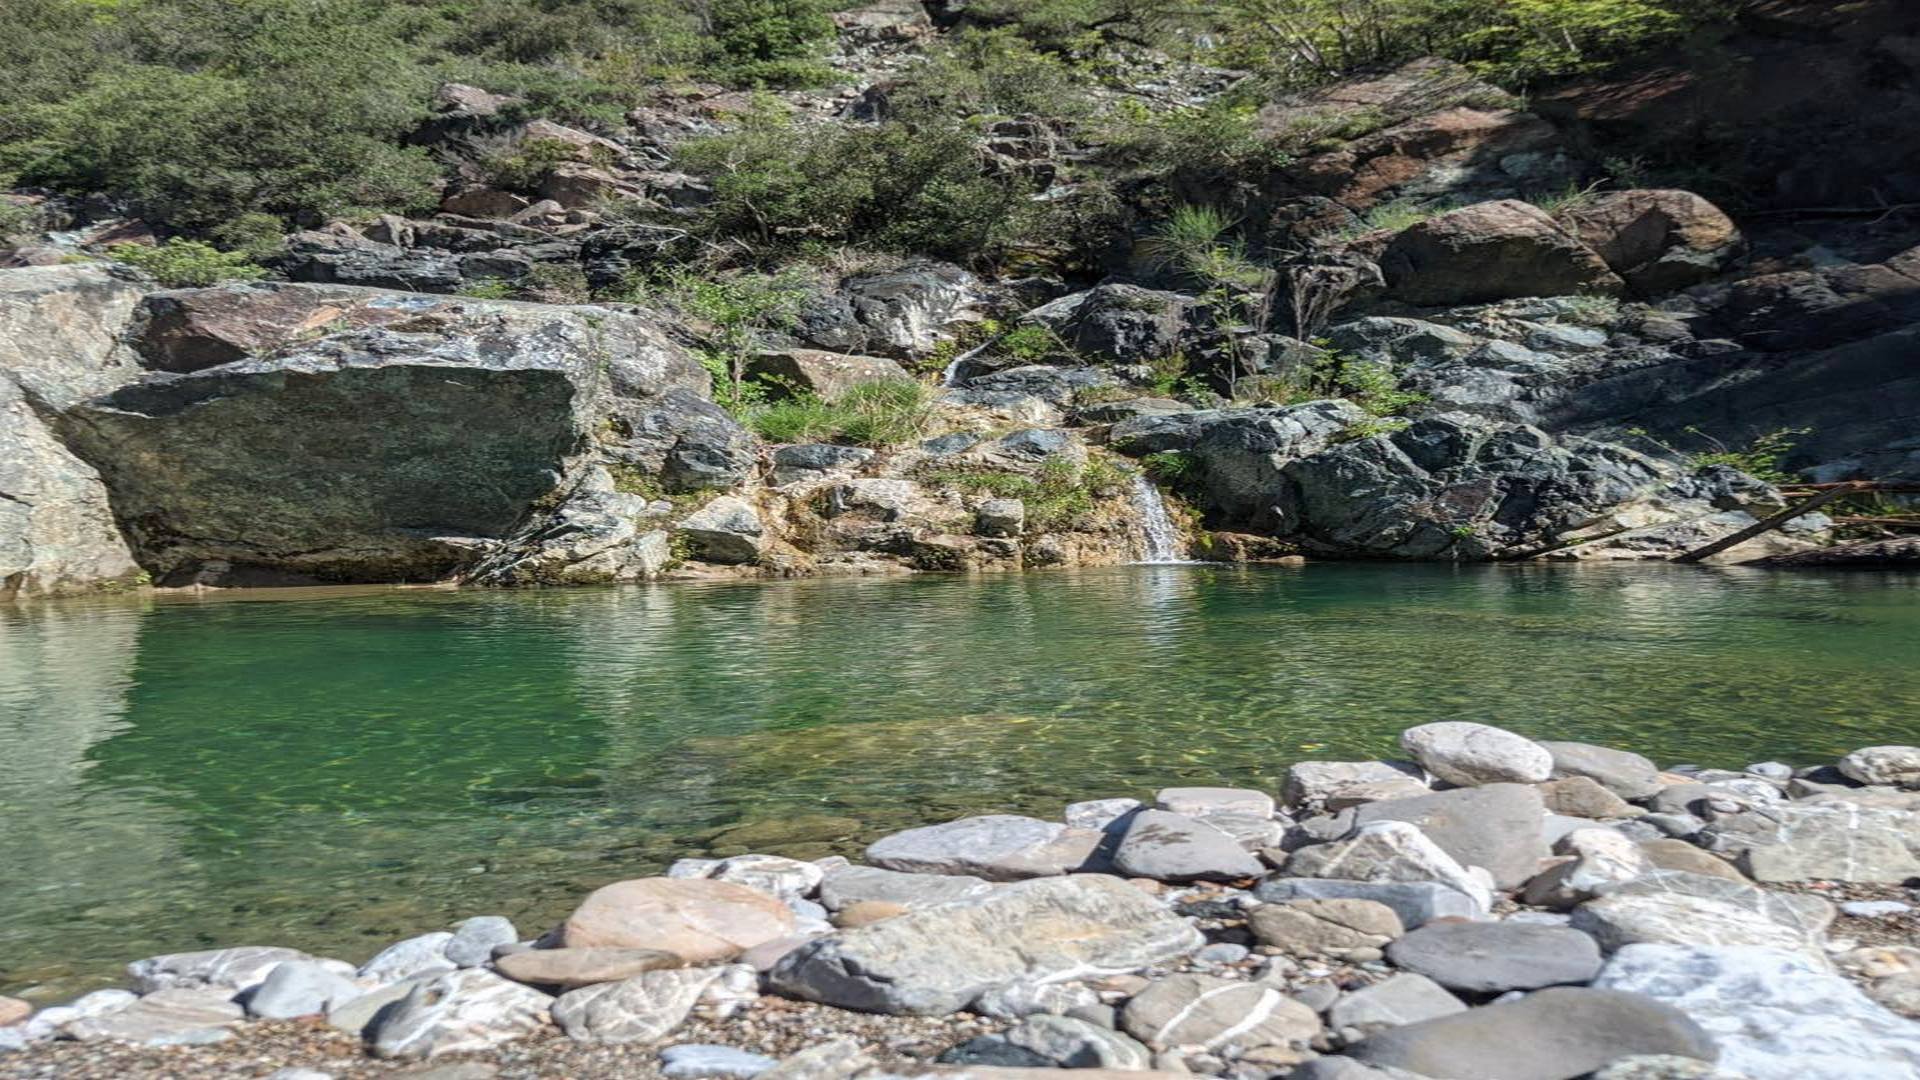 7 km trekking to the Diaterna Pools, in the heart of the Apennines